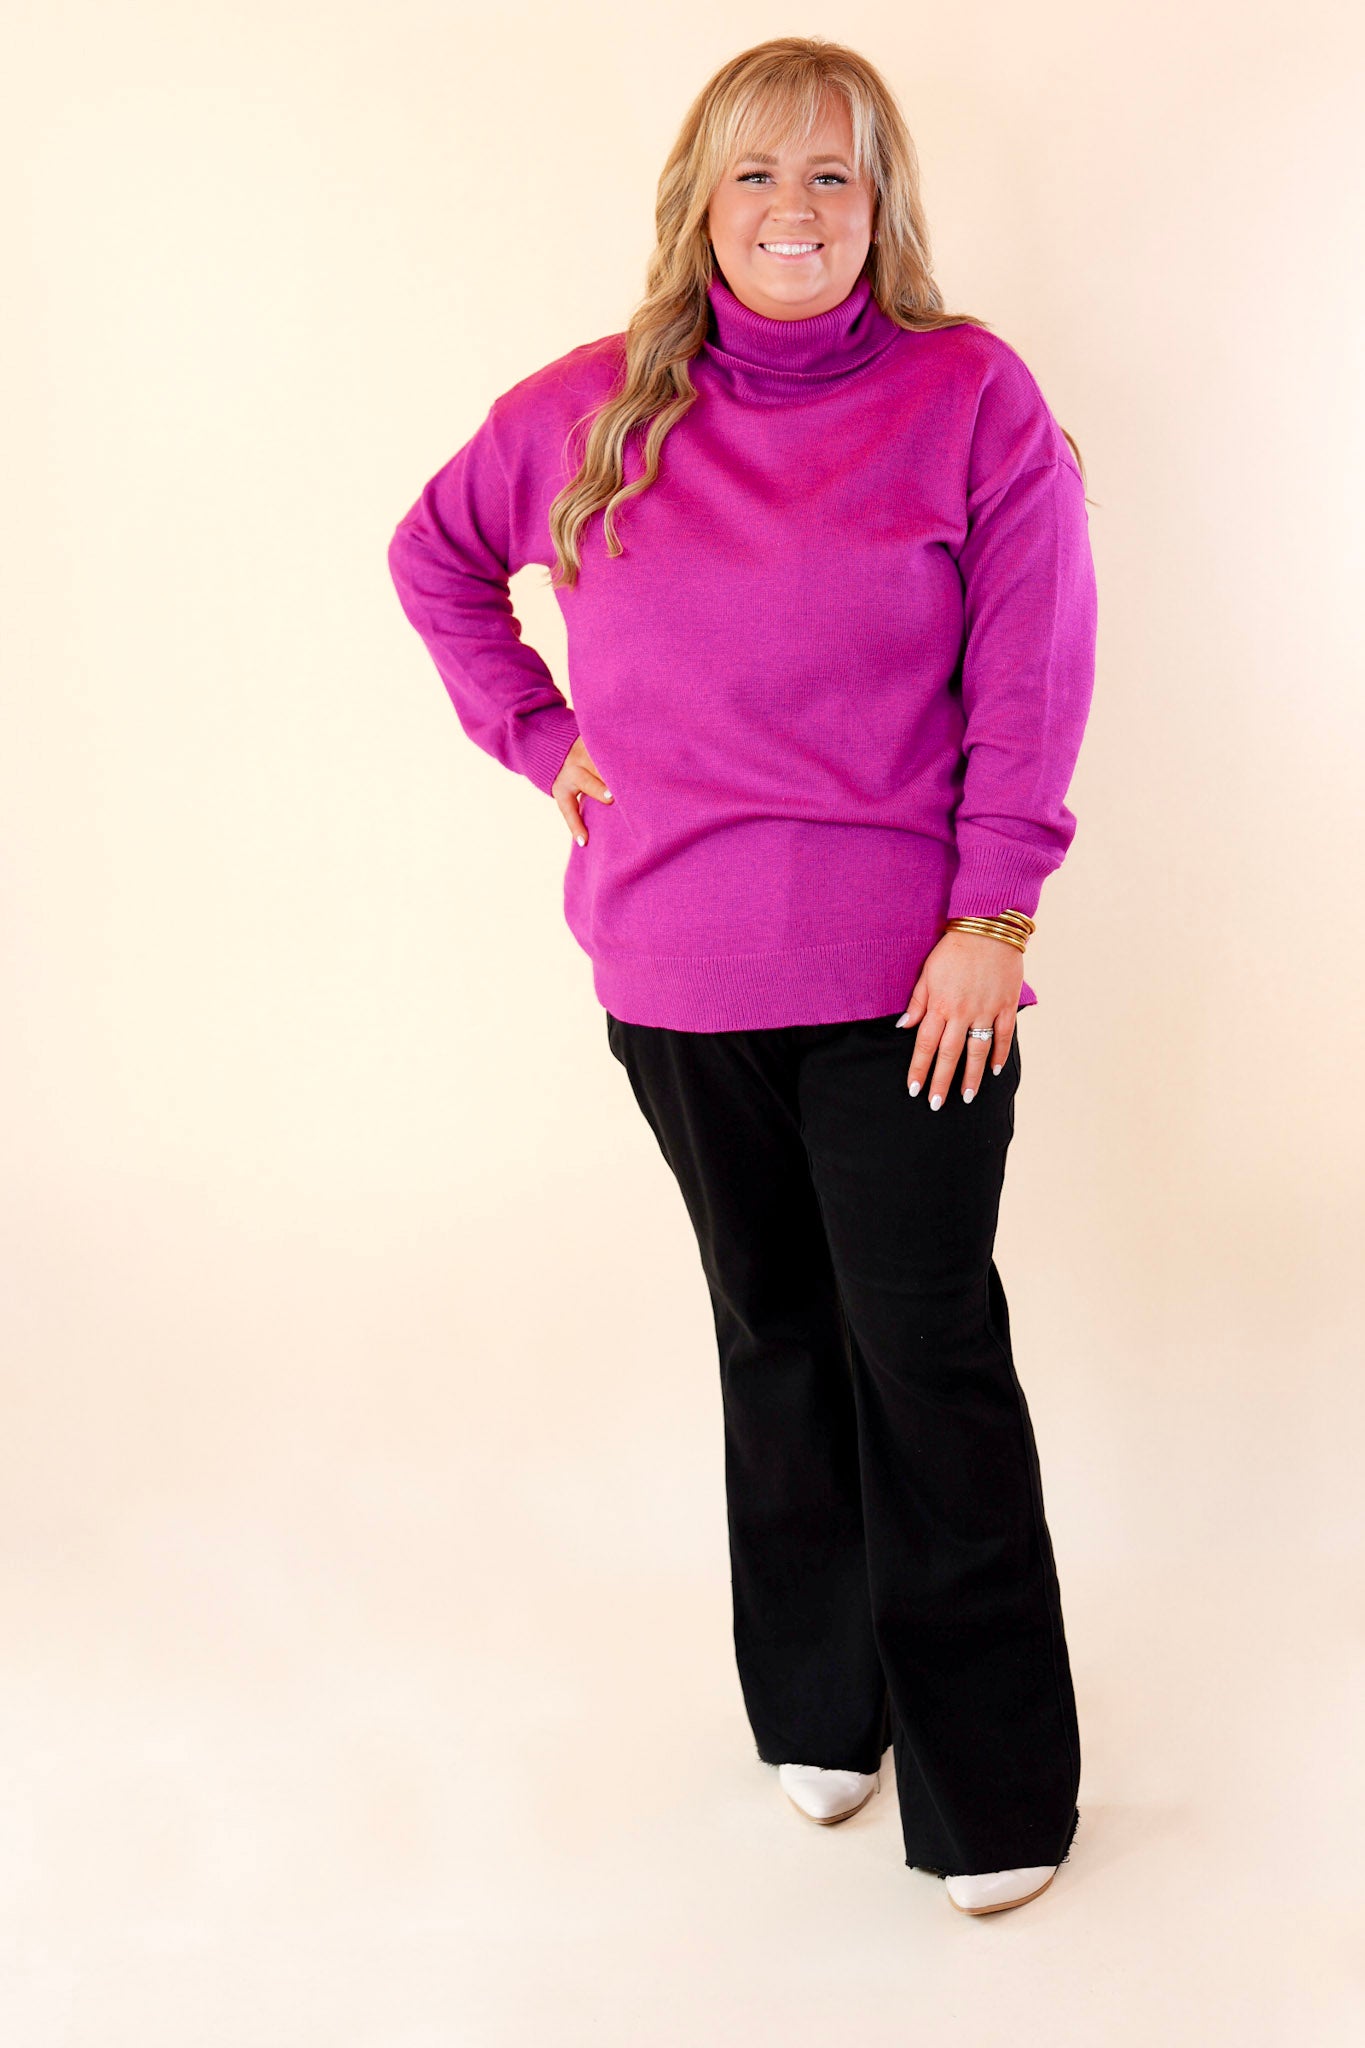 Chilly Days Ahead Turtle Neck Sweater with Long Sleeves in Magenta - Giddy Up Glamour Boutique